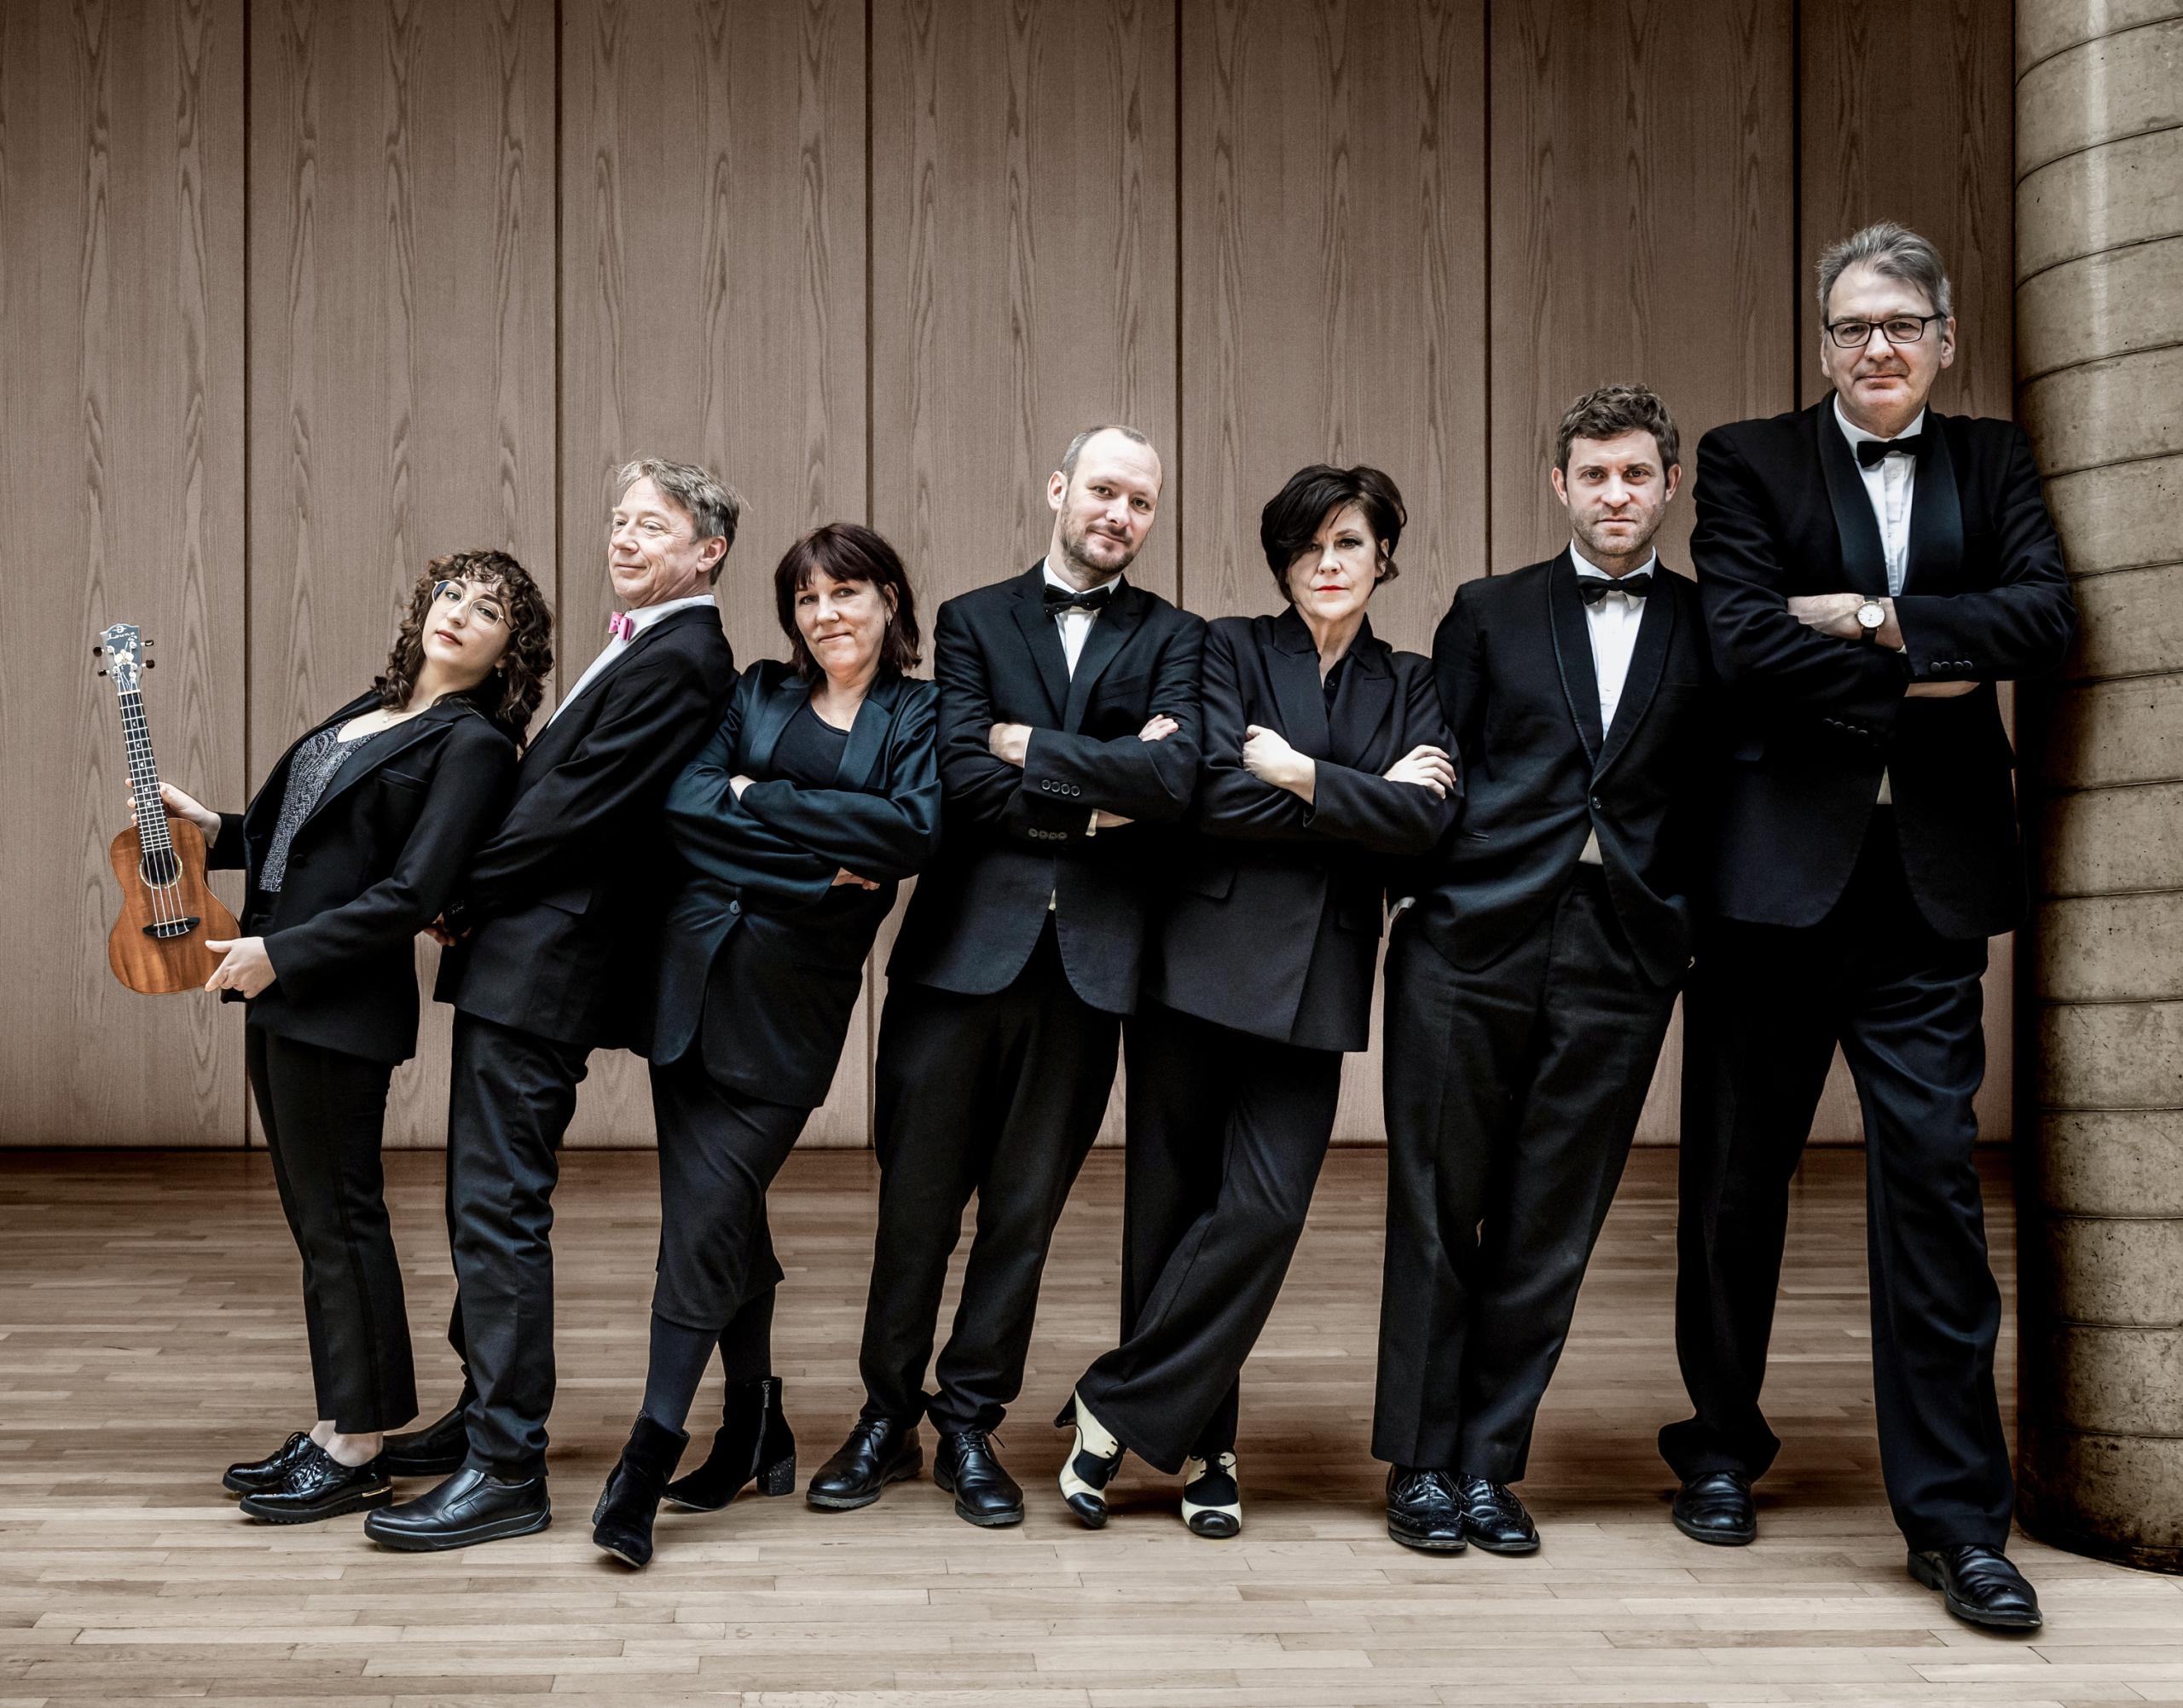 The members of the Ukulele Orchestra of Great Britain stand in black suits in front of a wooden wall and look into the camera.